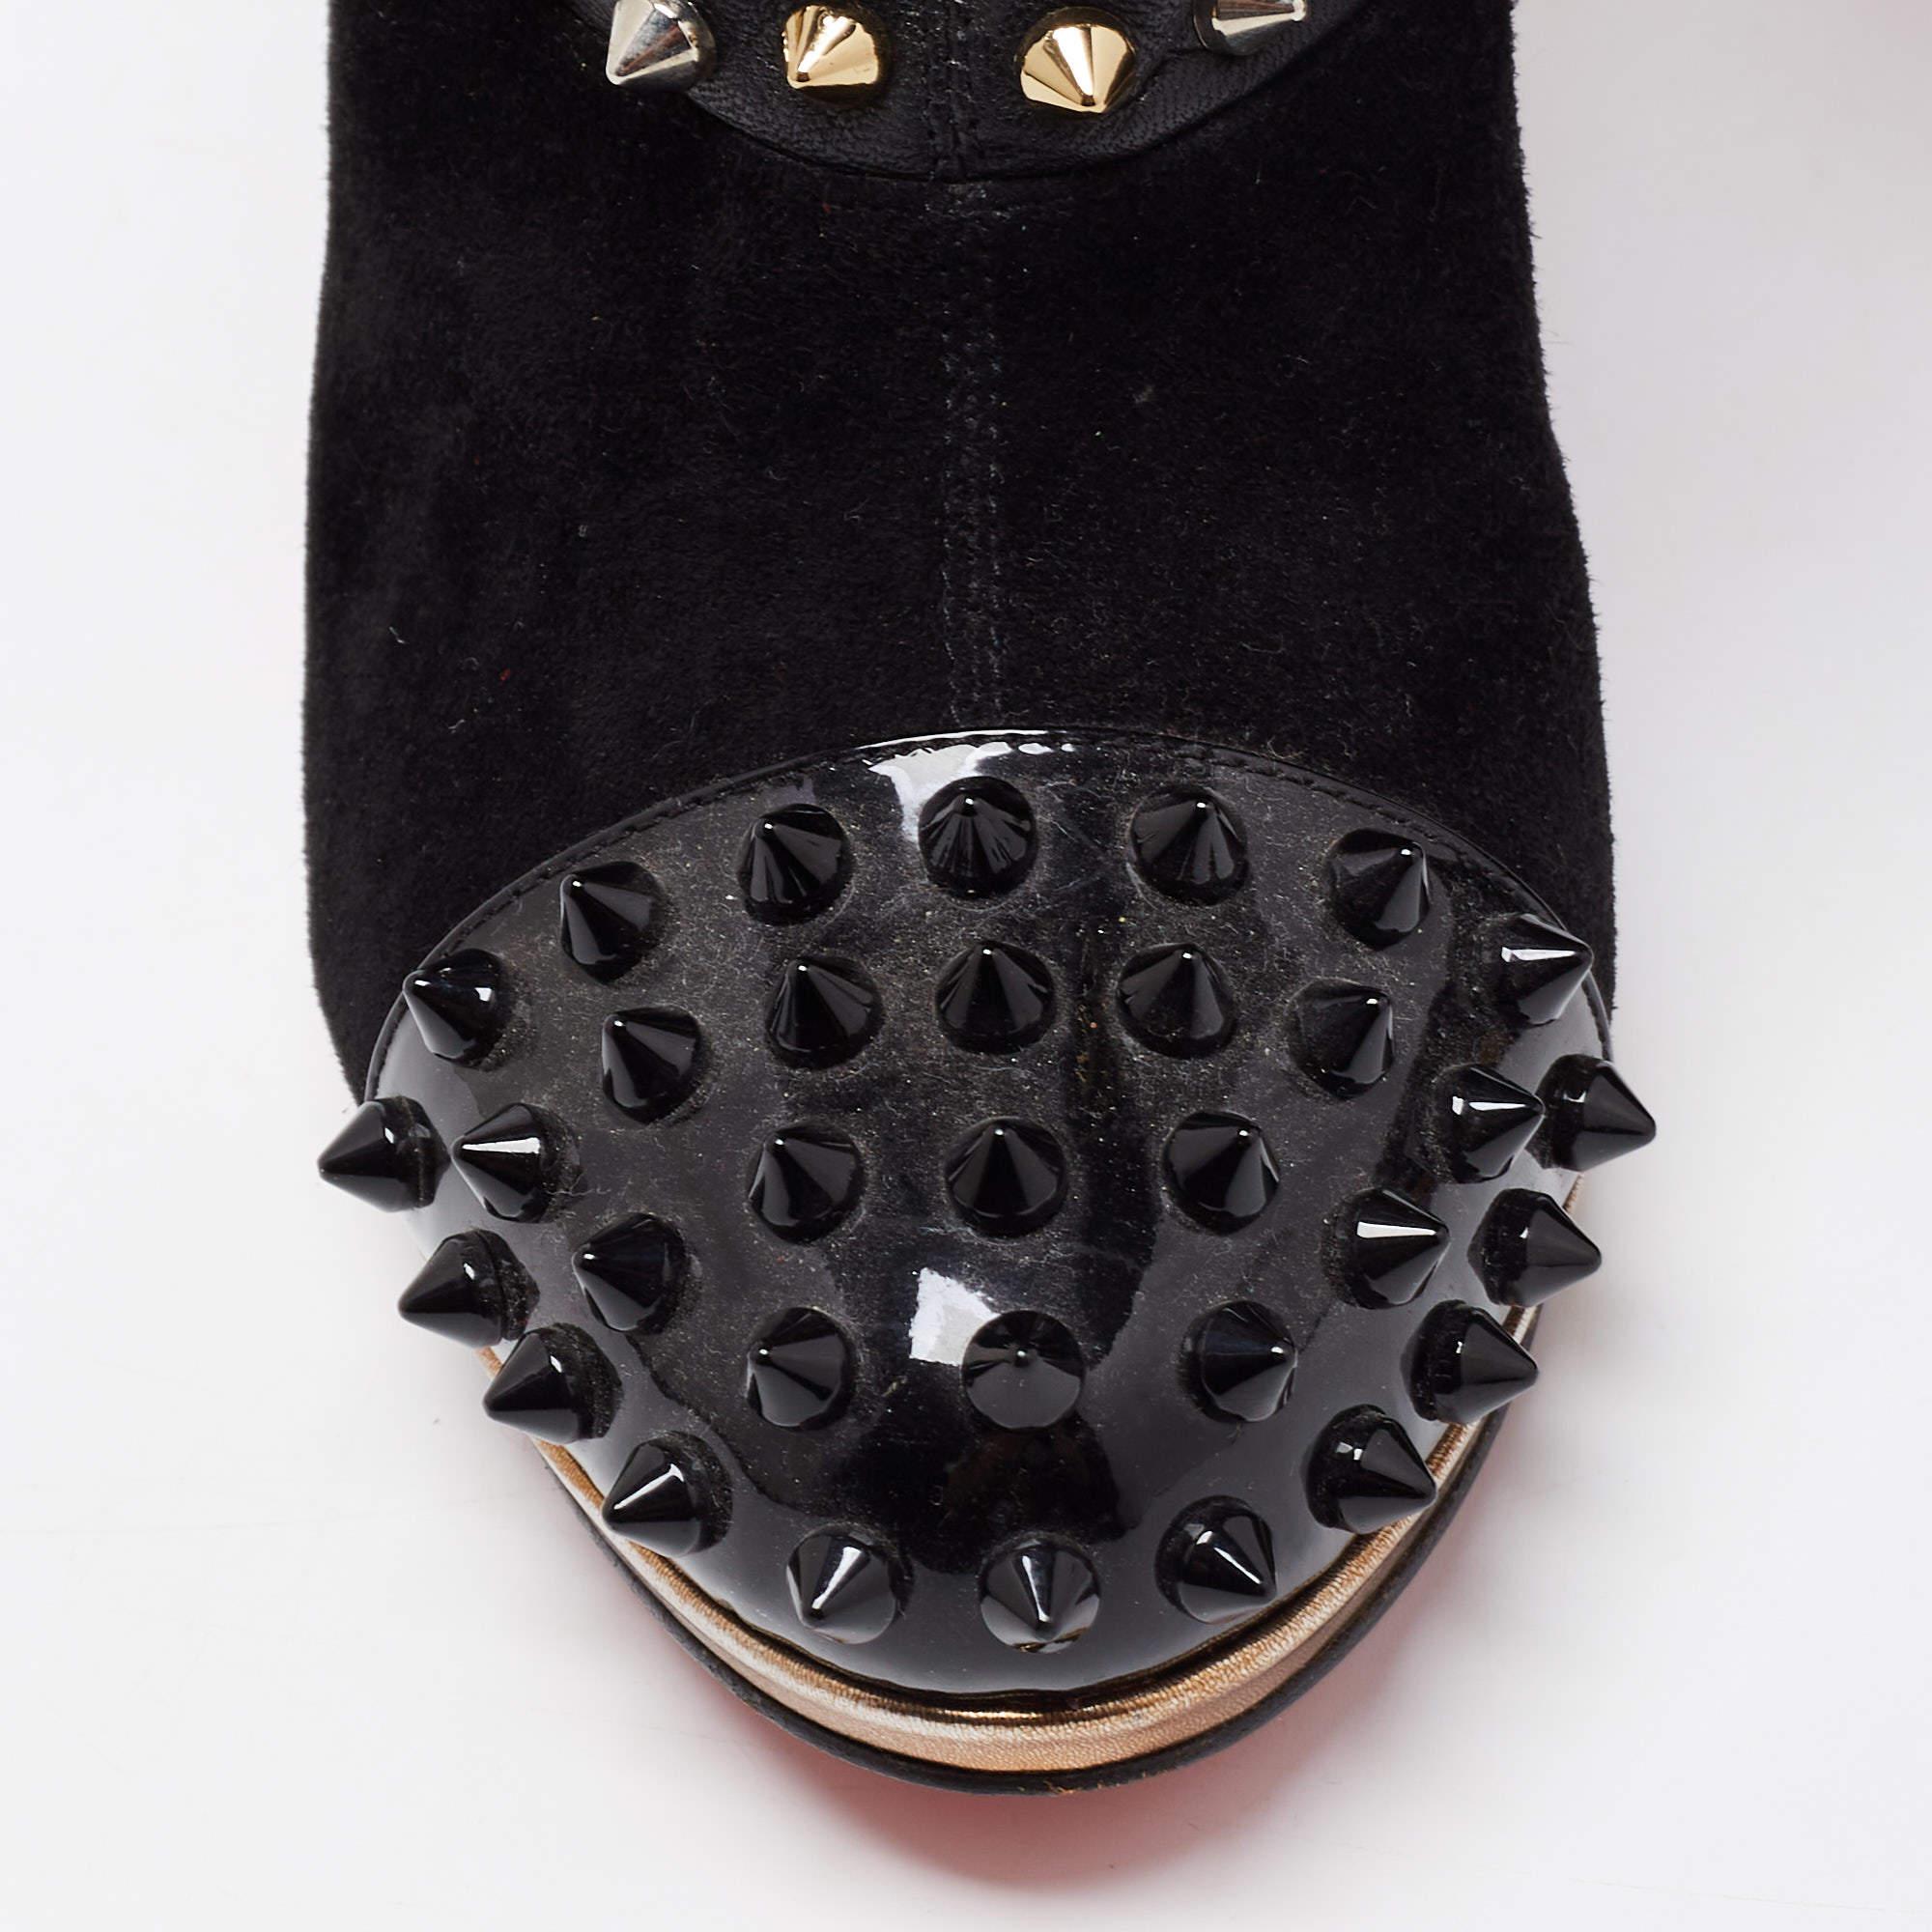 Christian Louboutin Black/Gold Suede, Patent Spike Wars Ankle Booties Size 35.5 For Sale 2